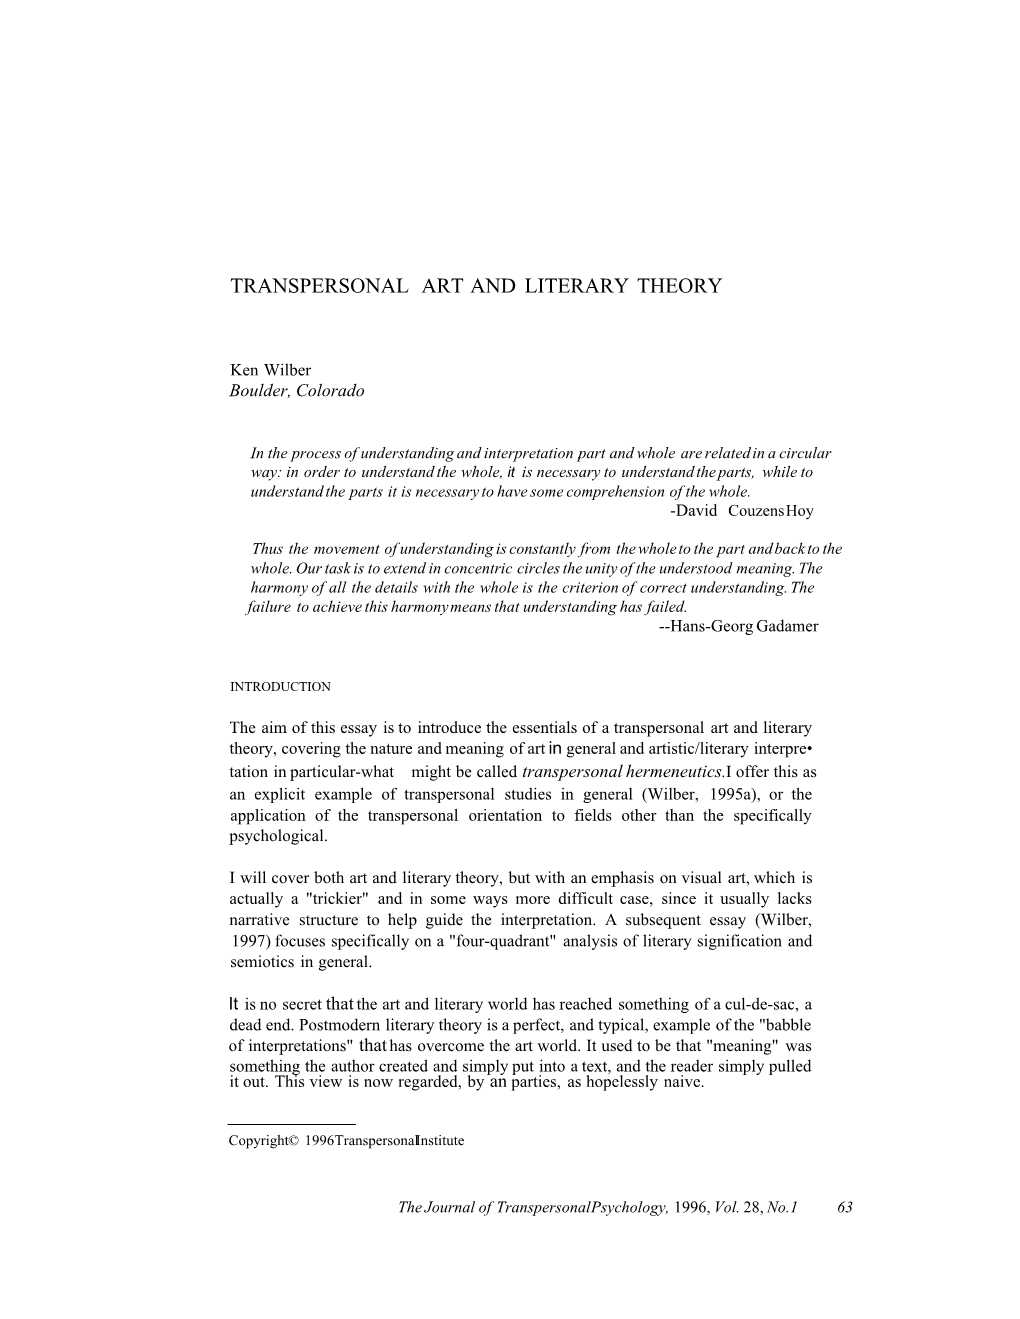 Transpersonal Art and Literary Theory